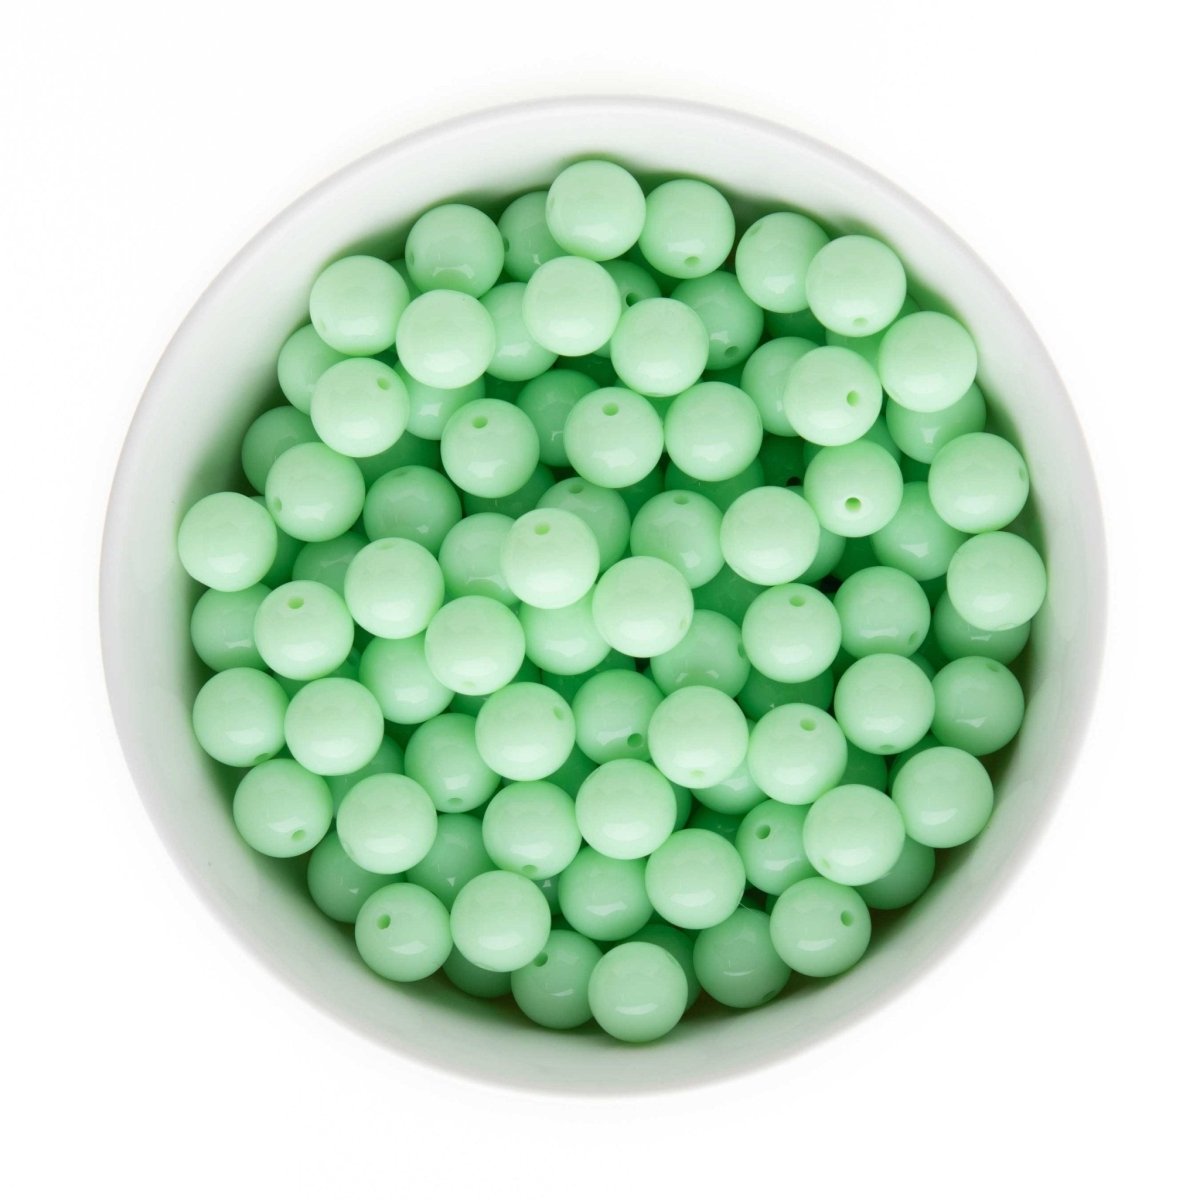 Acrylic Round Beads Solid 12mm Light Green from Cara & Co Craft Supply